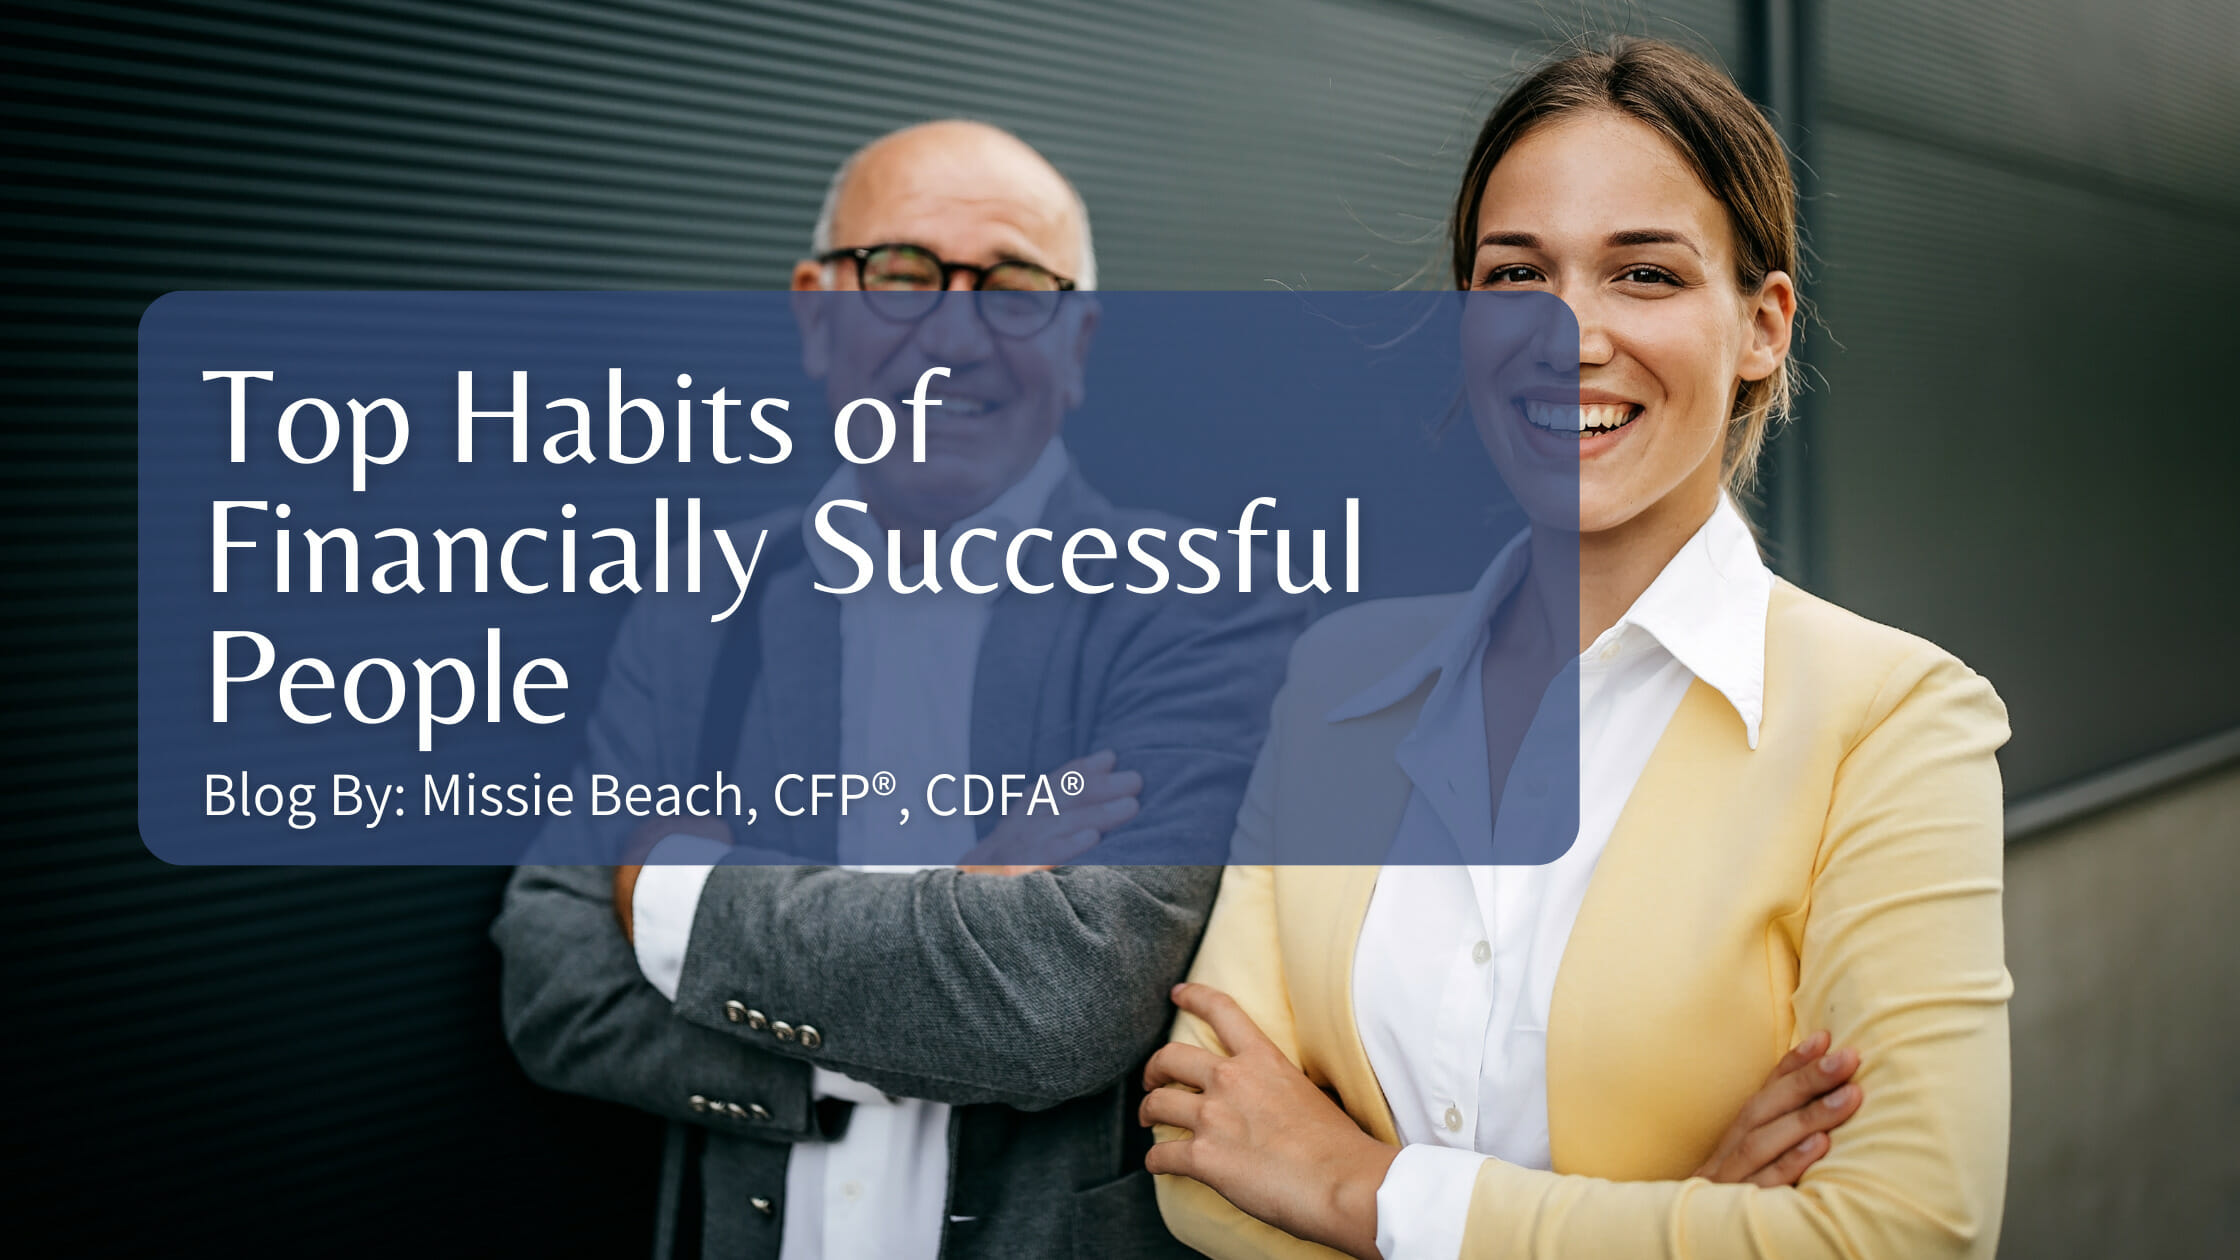 Top Habits of Financially Successful People